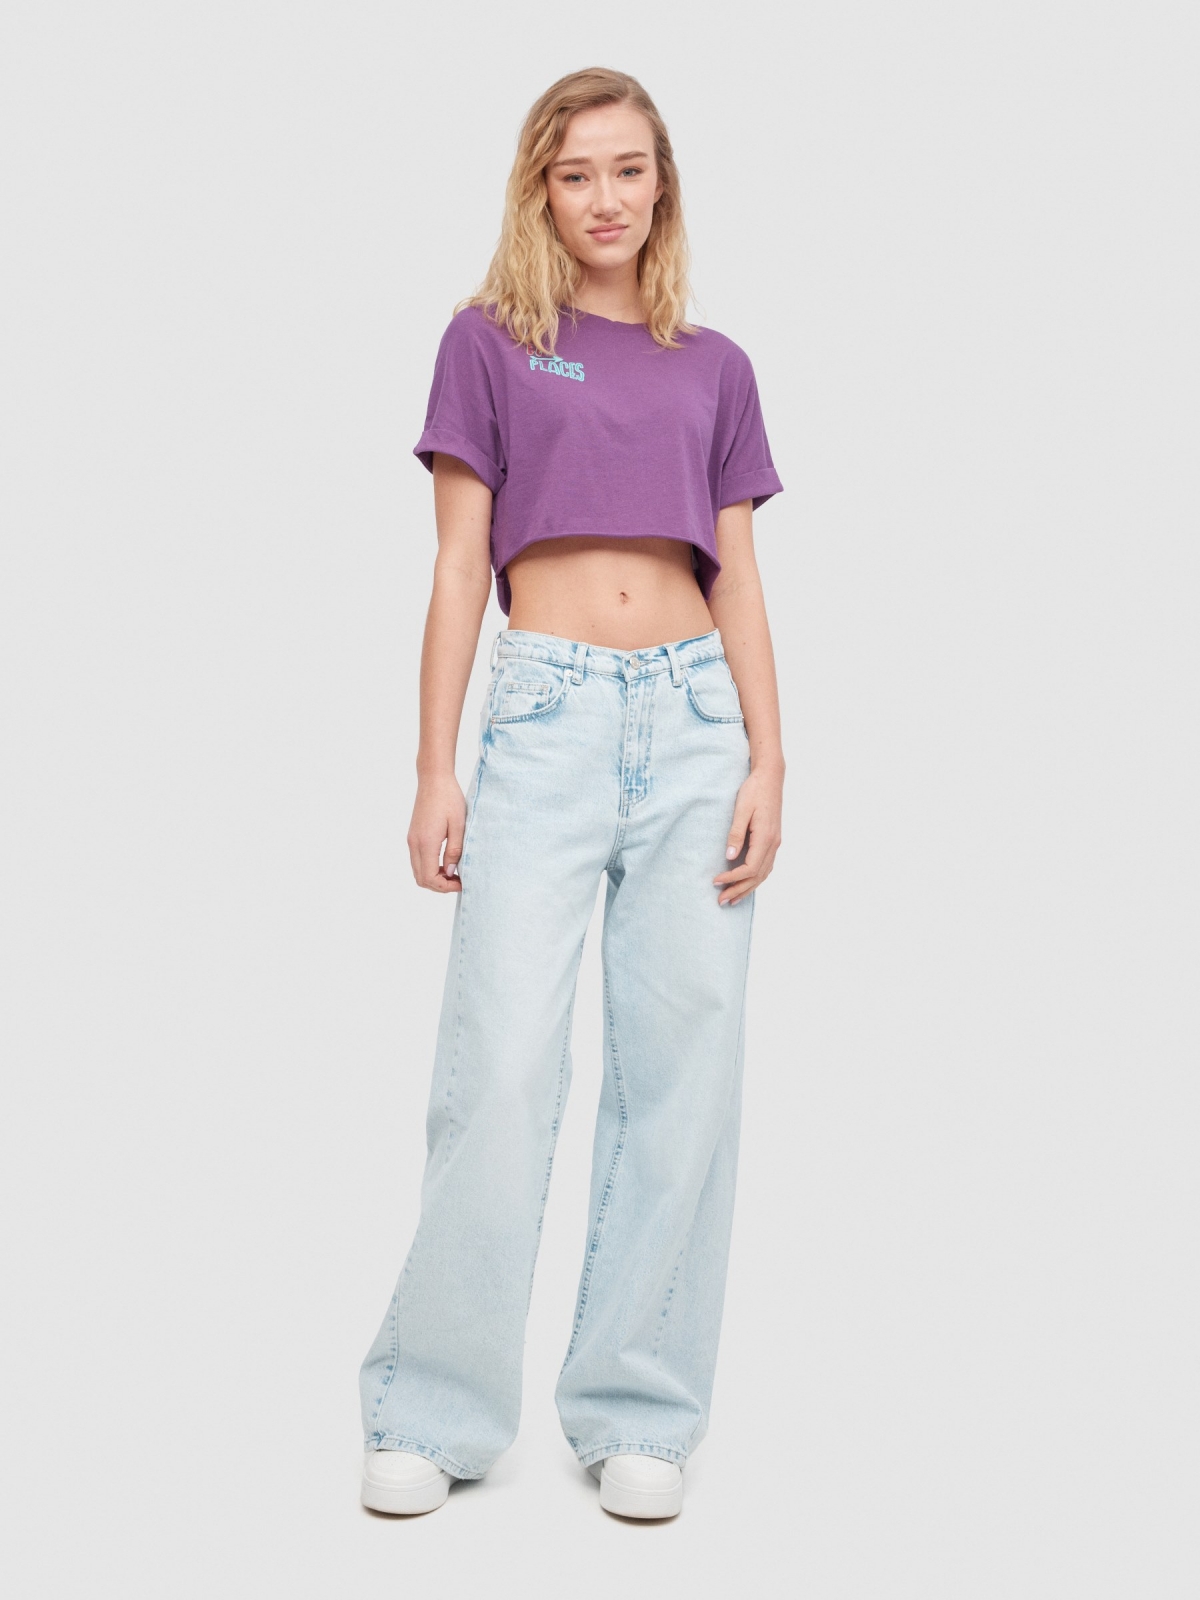 Travelling crop top aubergine front view